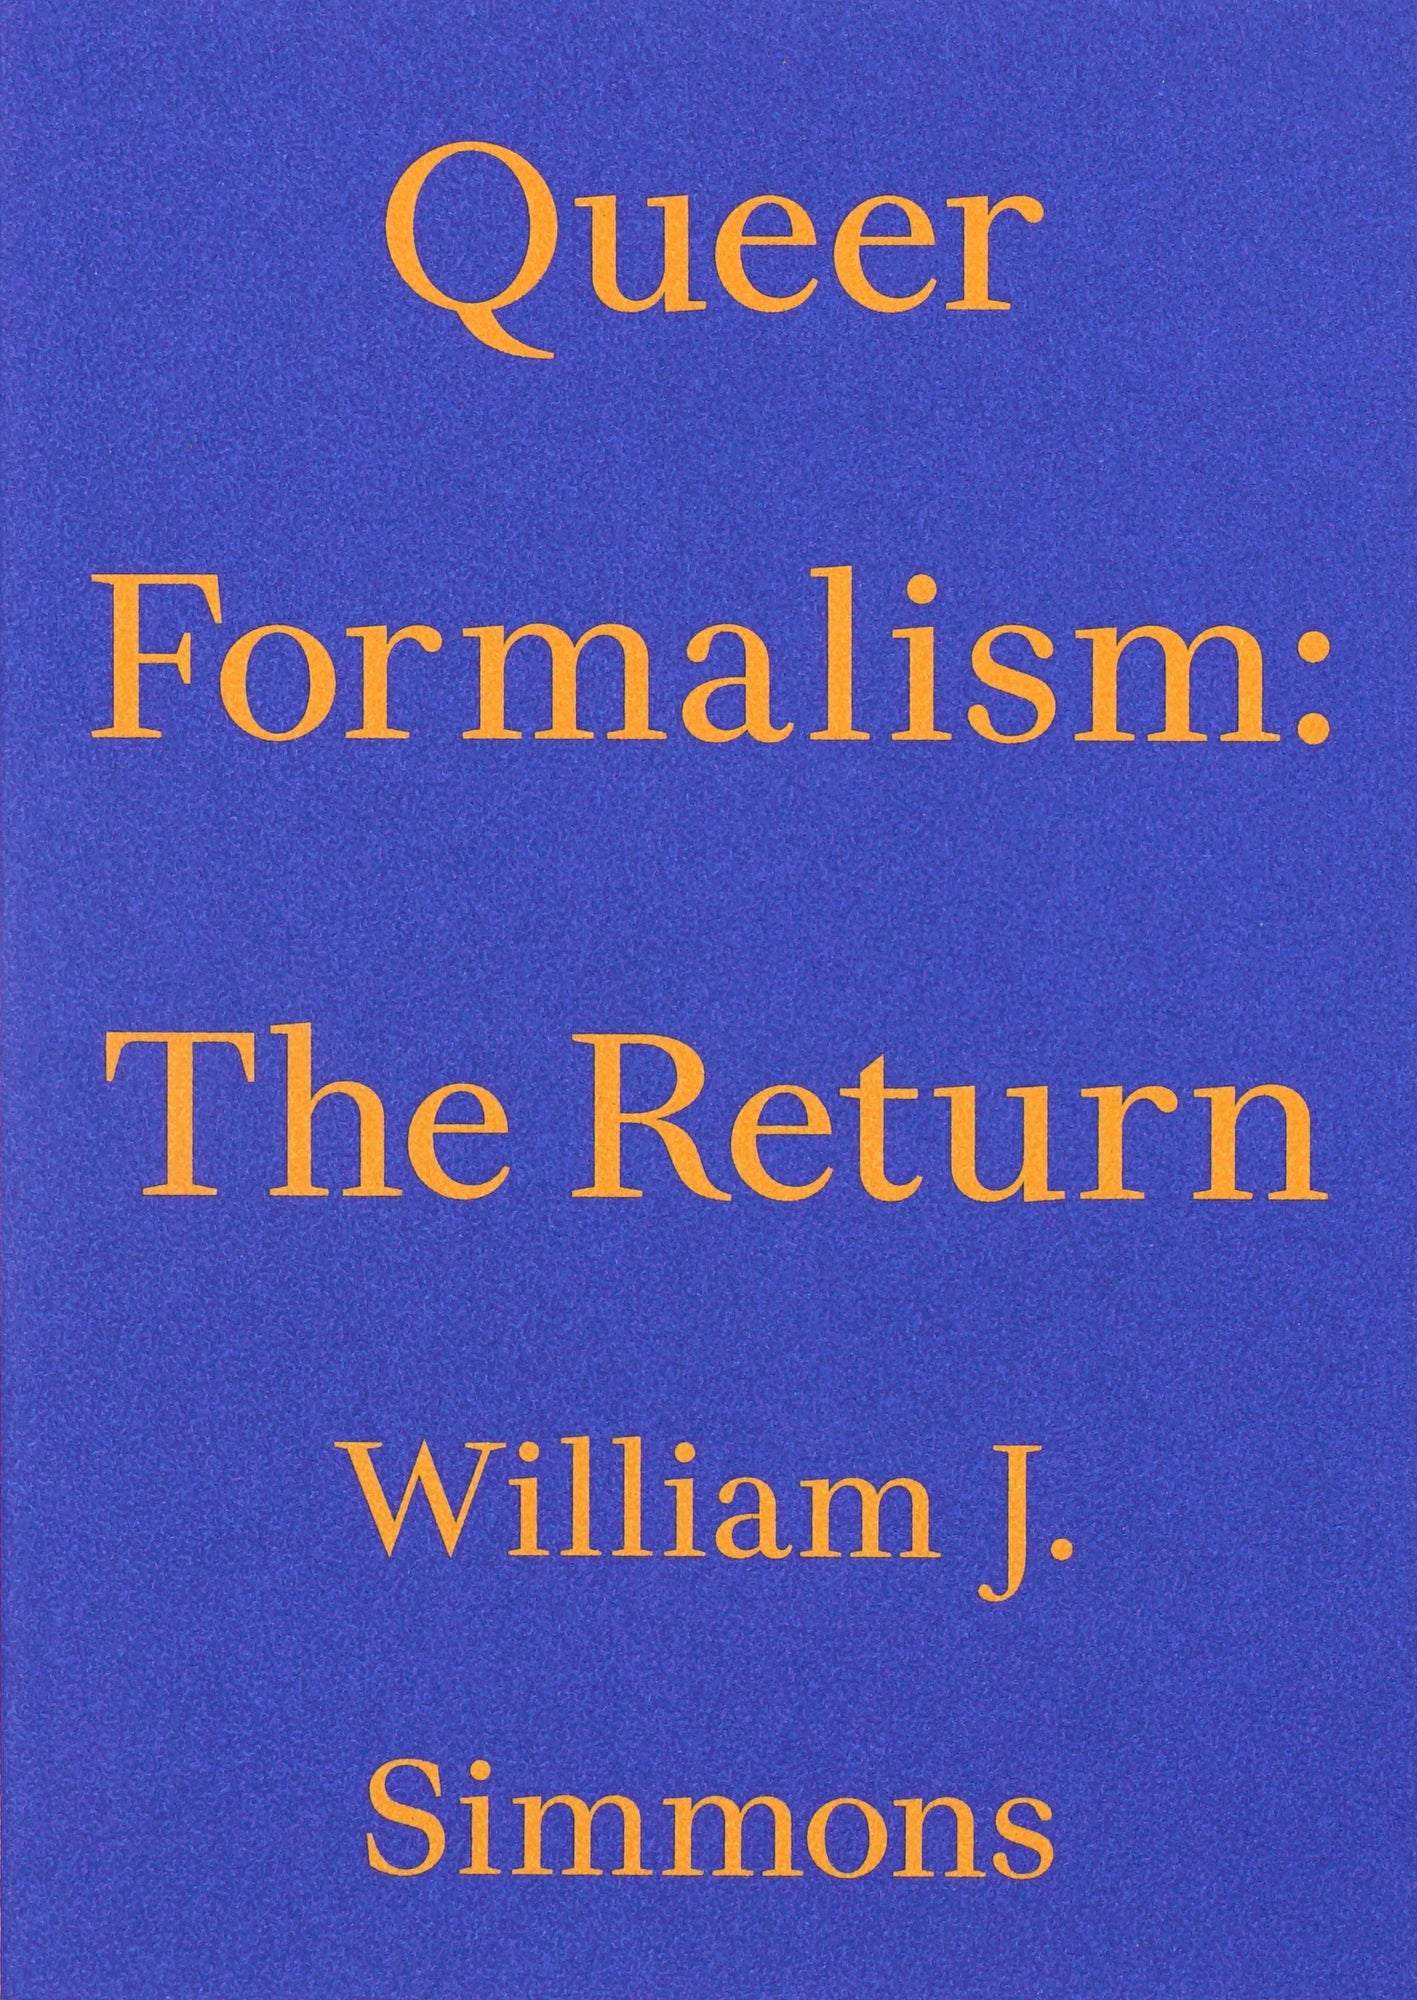 Blue book cover with the title and author fo the book written in yellow font.